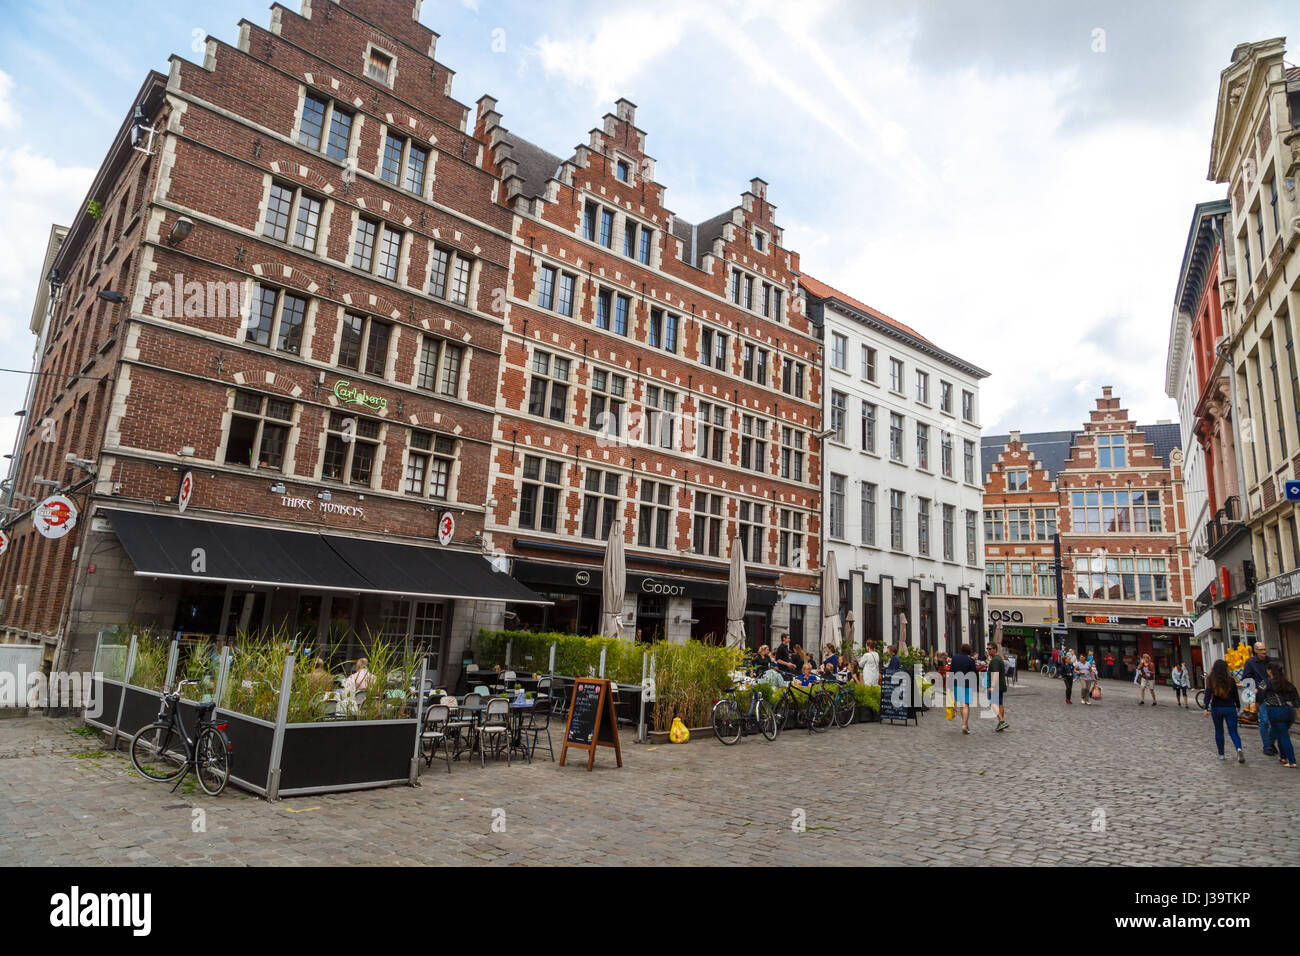 GENT, BELGIUM - JULY 6, 2016 : Medieval Ghent streets with colorful buildings and people. Gent is popular place in Belgium. Stock Photo